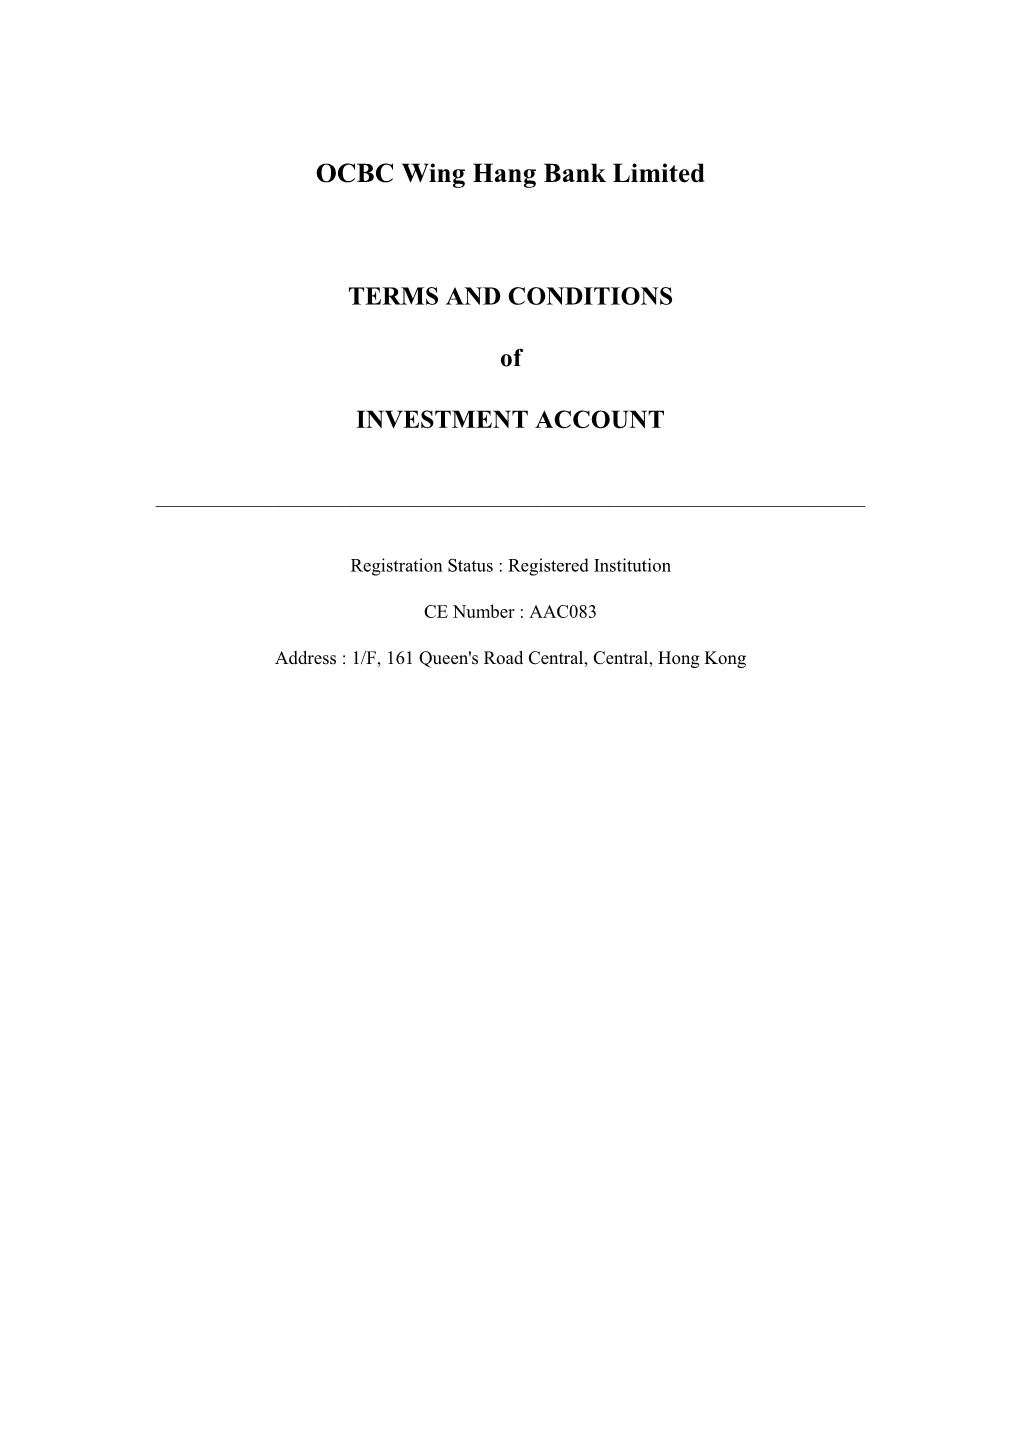 Amendments to the Terms and Conditions of Investment Account